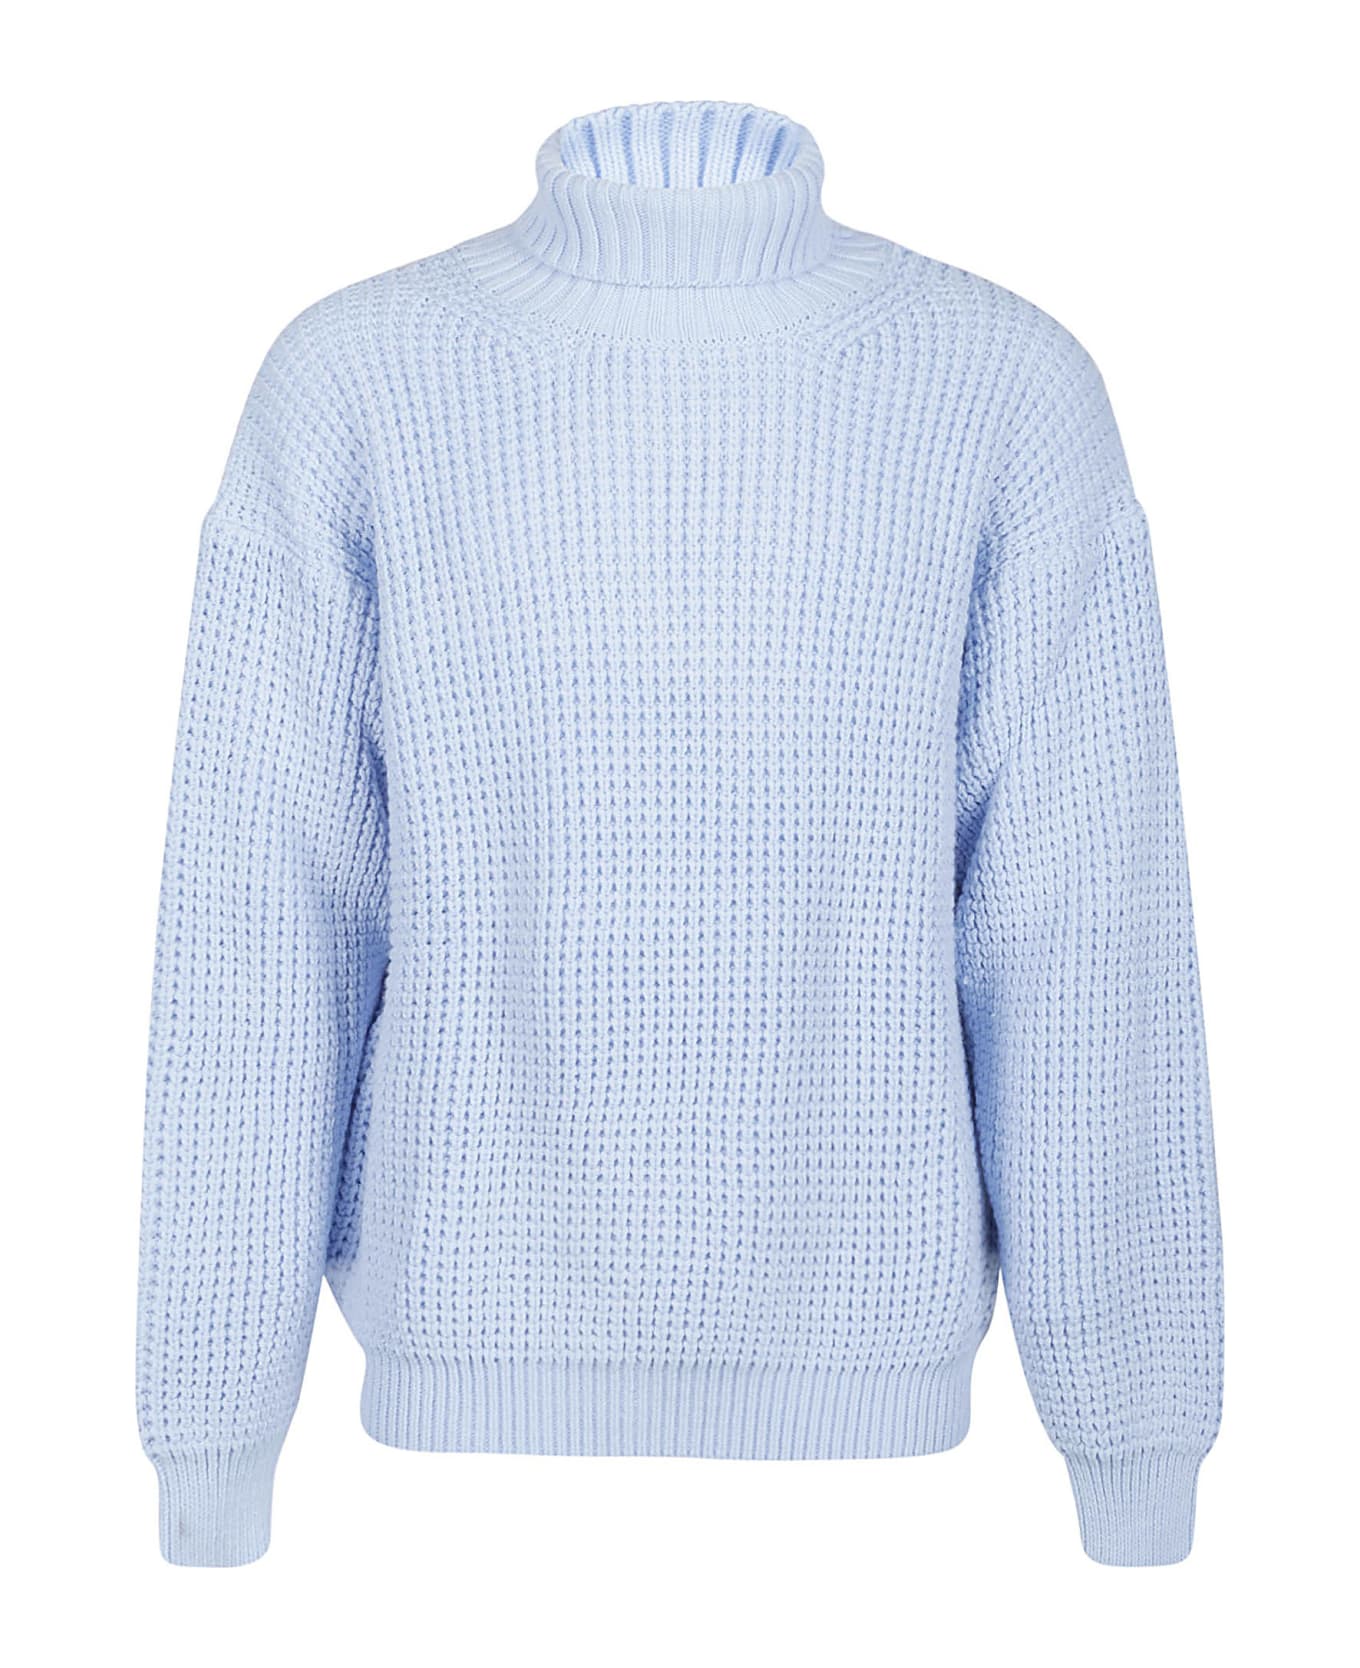 Family First Milano English Turle Neck Sweater - Light Blue